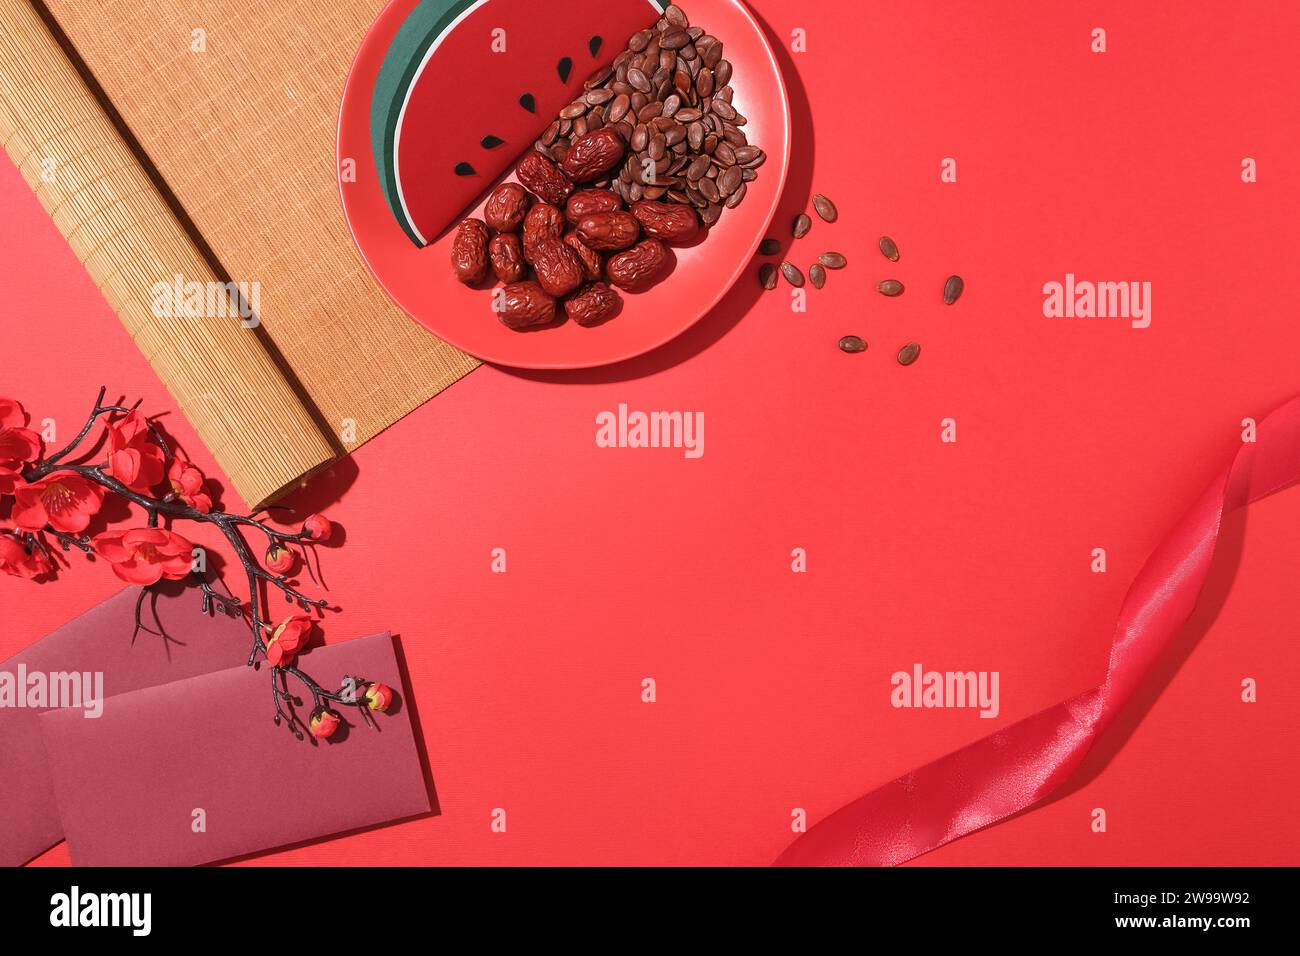 Watermelon, melon seeds and jujube on a ceramic plate, a peach blossom branch, a bamboo curtain and two lucky money envelopes are displayed on a red b Stock Photo